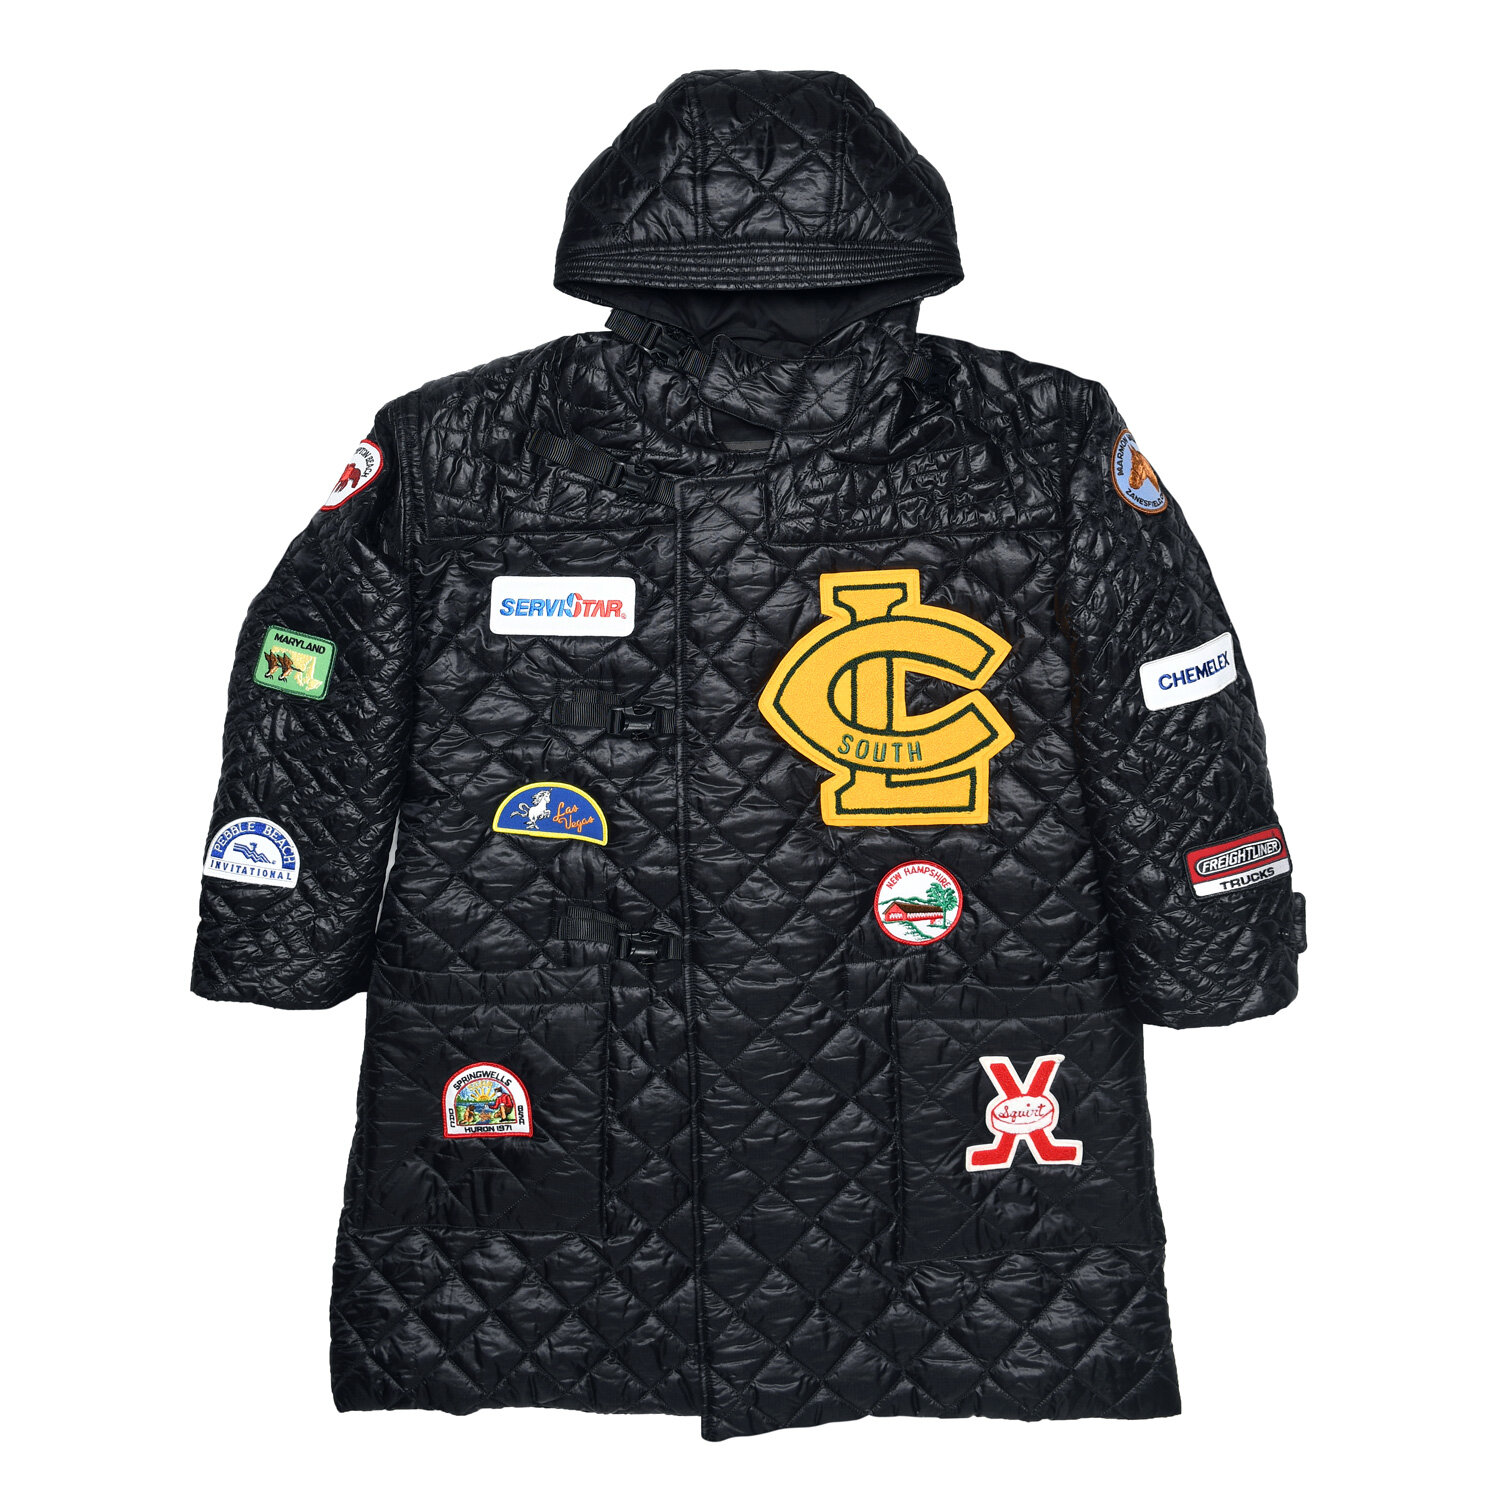 Quilted Duffle Coat w/ Patch - Diamond Dotera Fill 7oz Black 